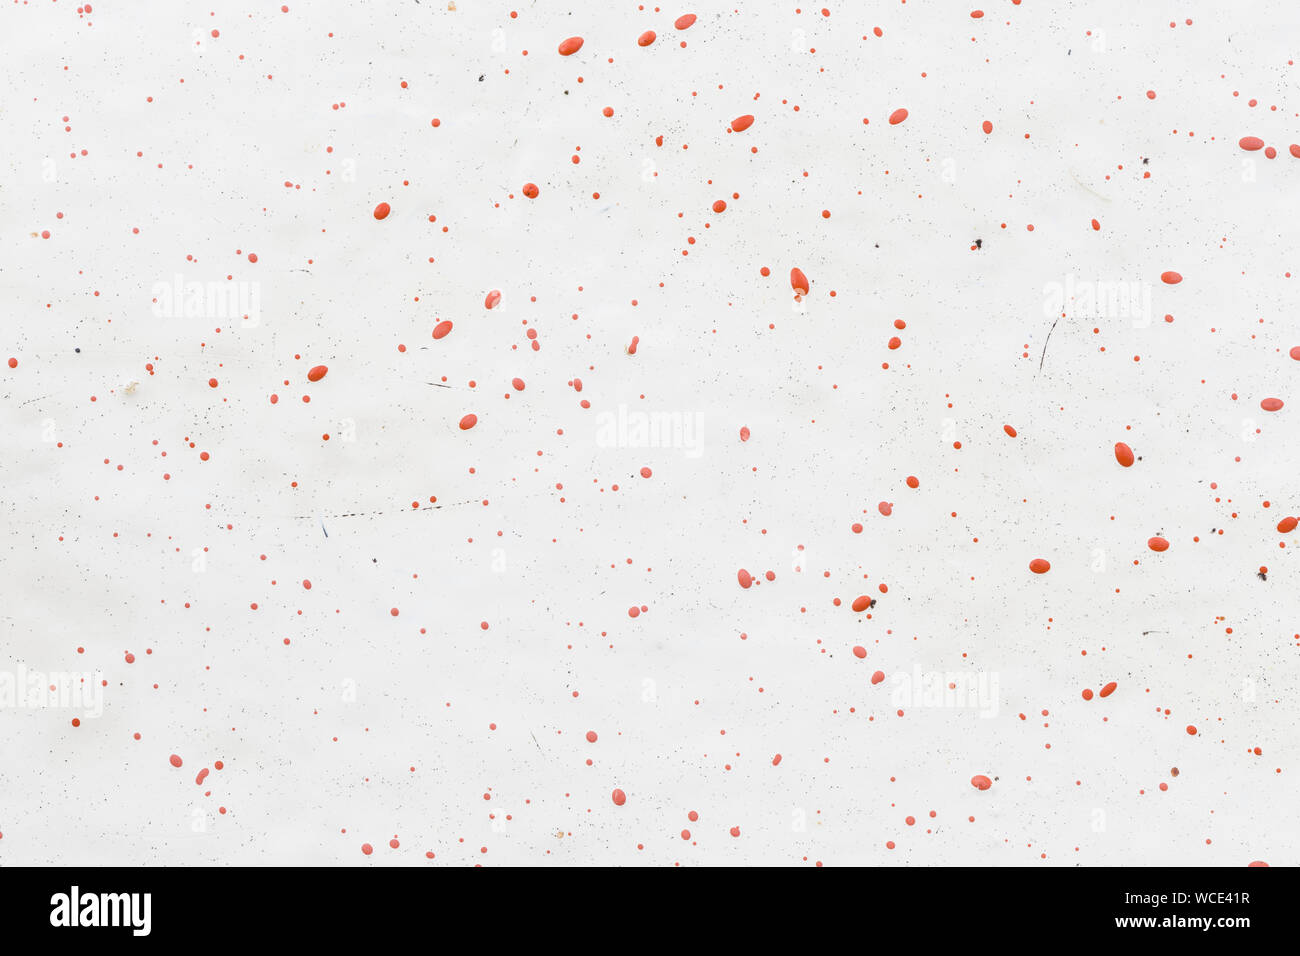 Close-up of a white fiberglass (fibreglass) surface with red dots. High resolution full frame abstract background. Copy space. Stock Photo